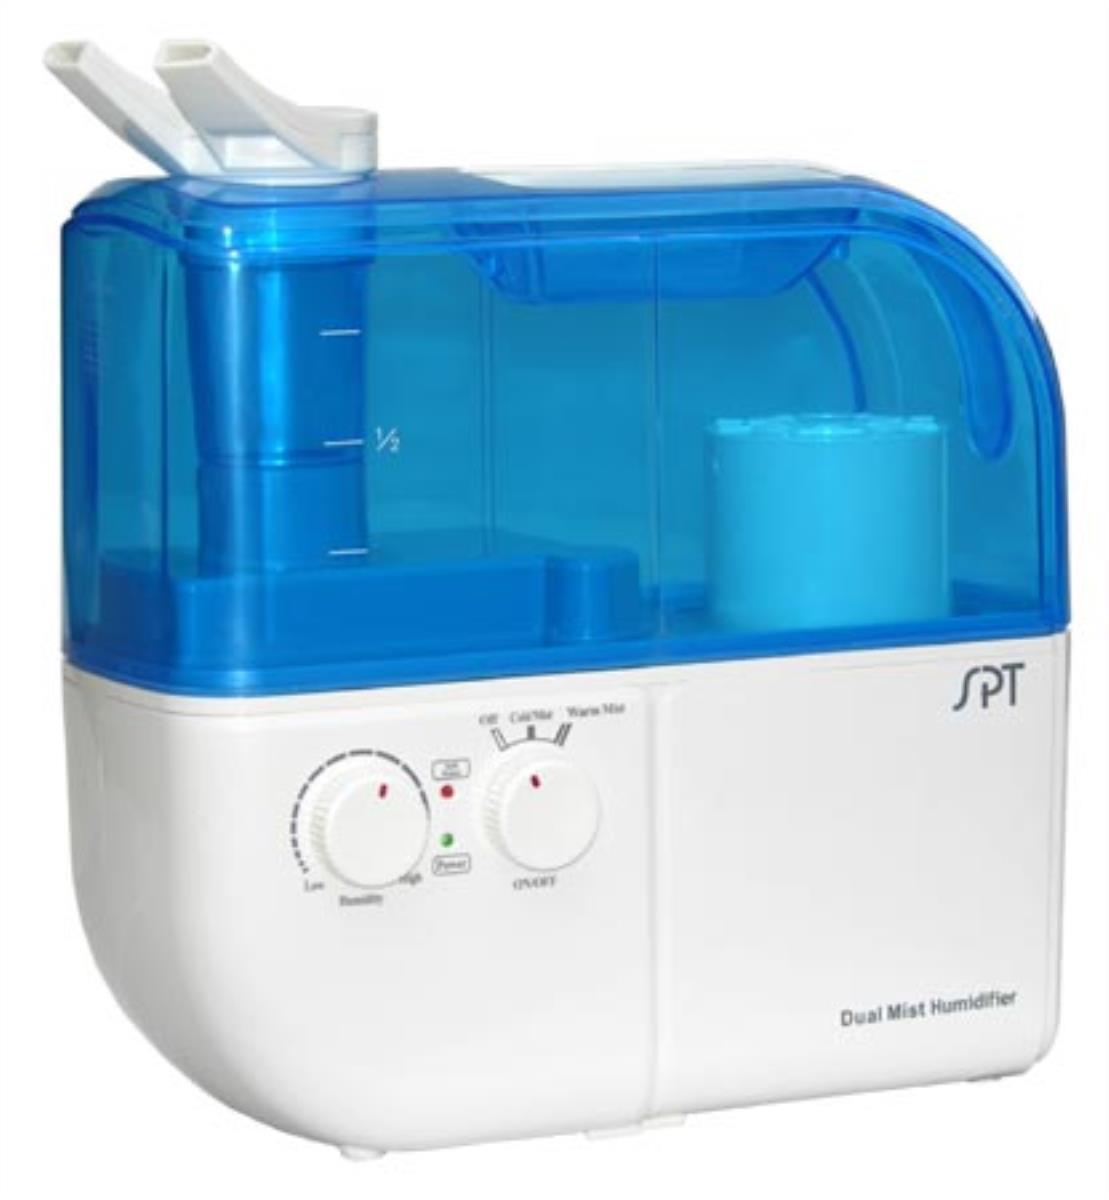 Sunpentown SU-4010 Humidifier - White was $89.99 now $68.99 (23.0% off)